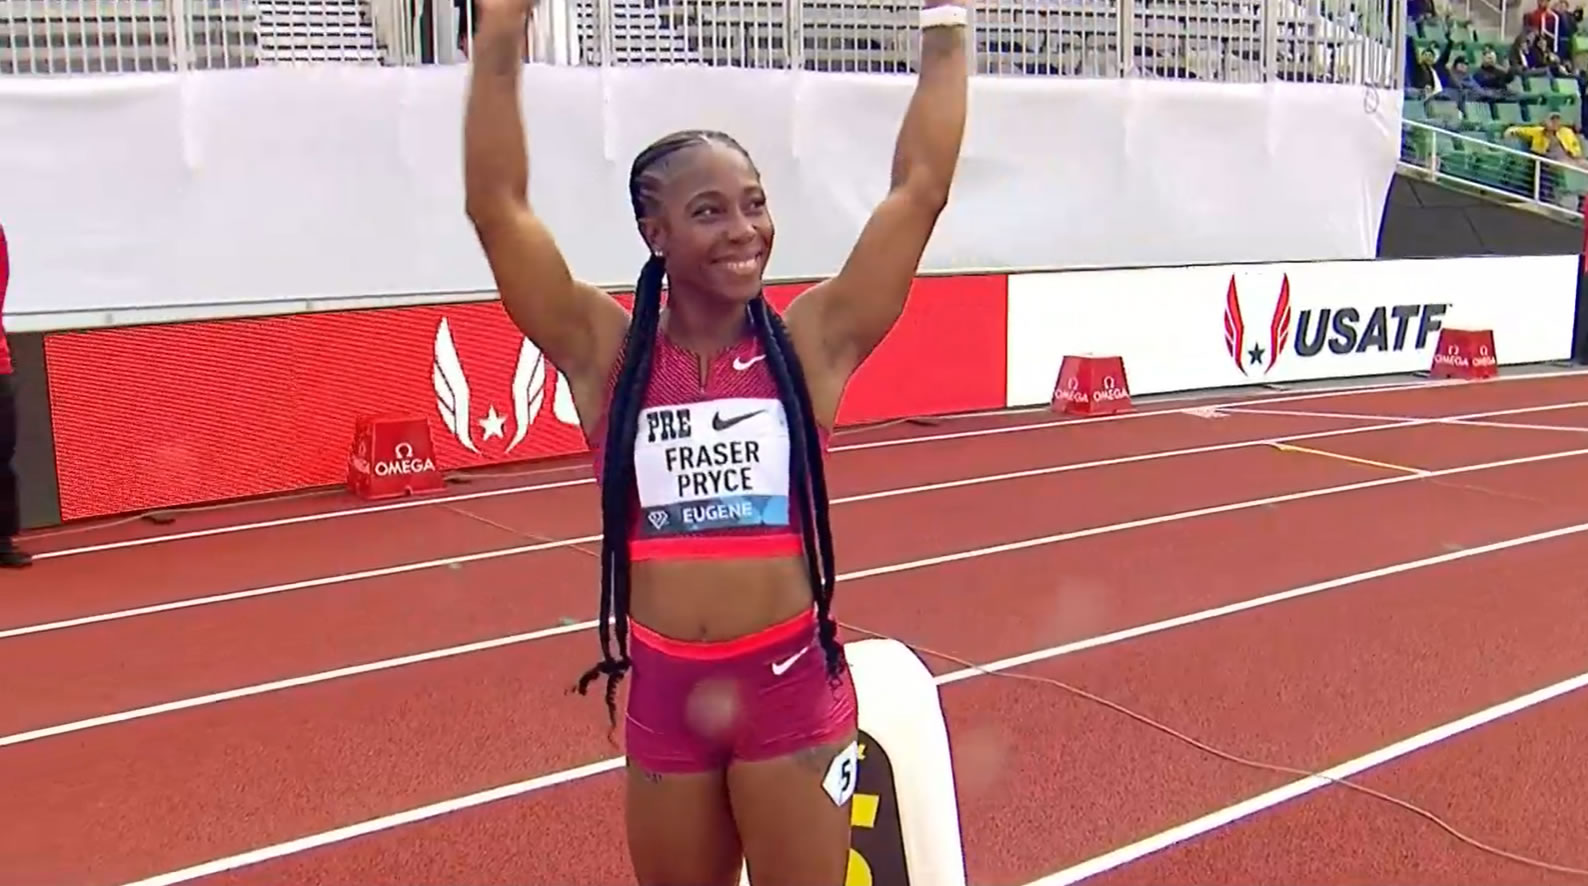 Shelly-Ann Fraser-Pryce wins 200m at Wanda Diamond League in Eugene in 22.41 seconds